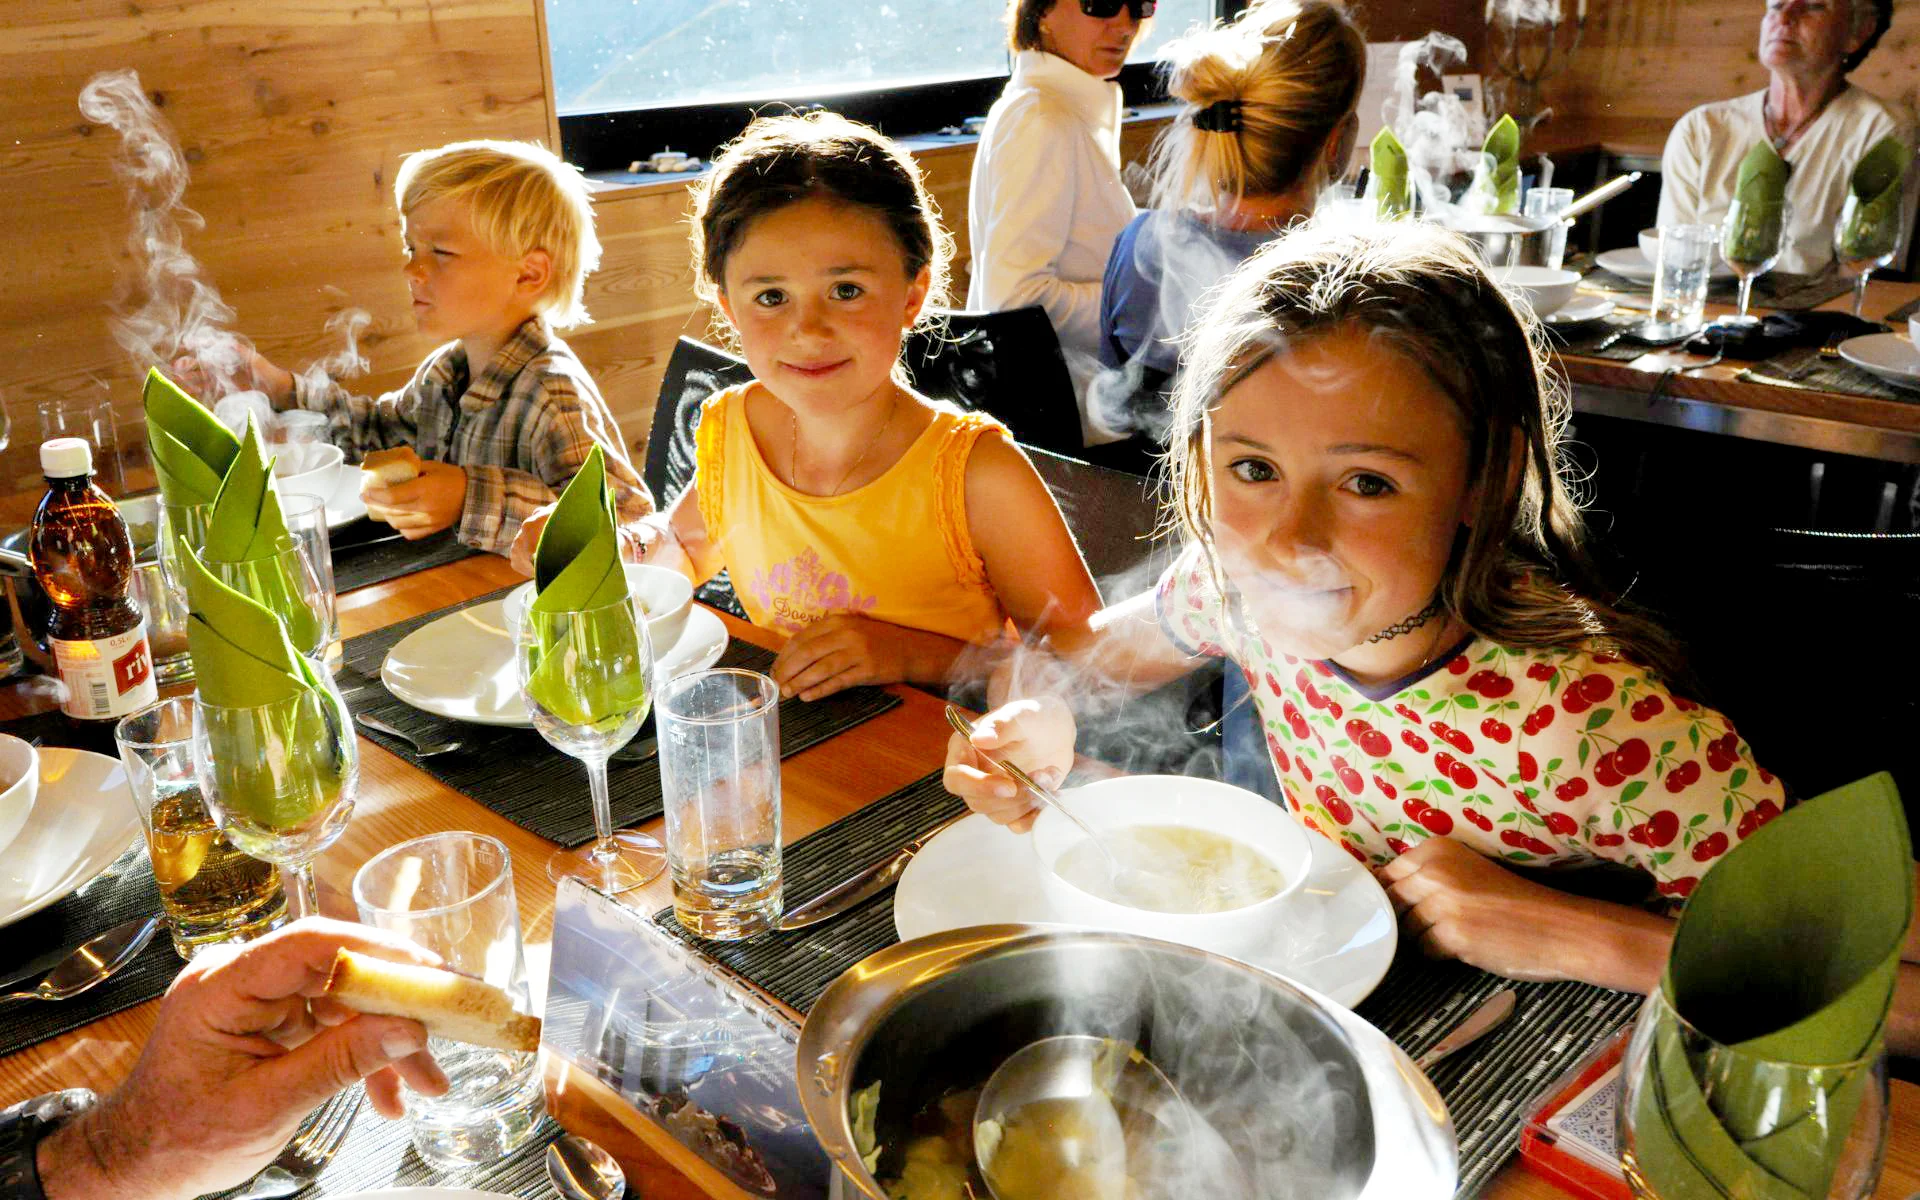 Children eating hot soup in a mountain hut.